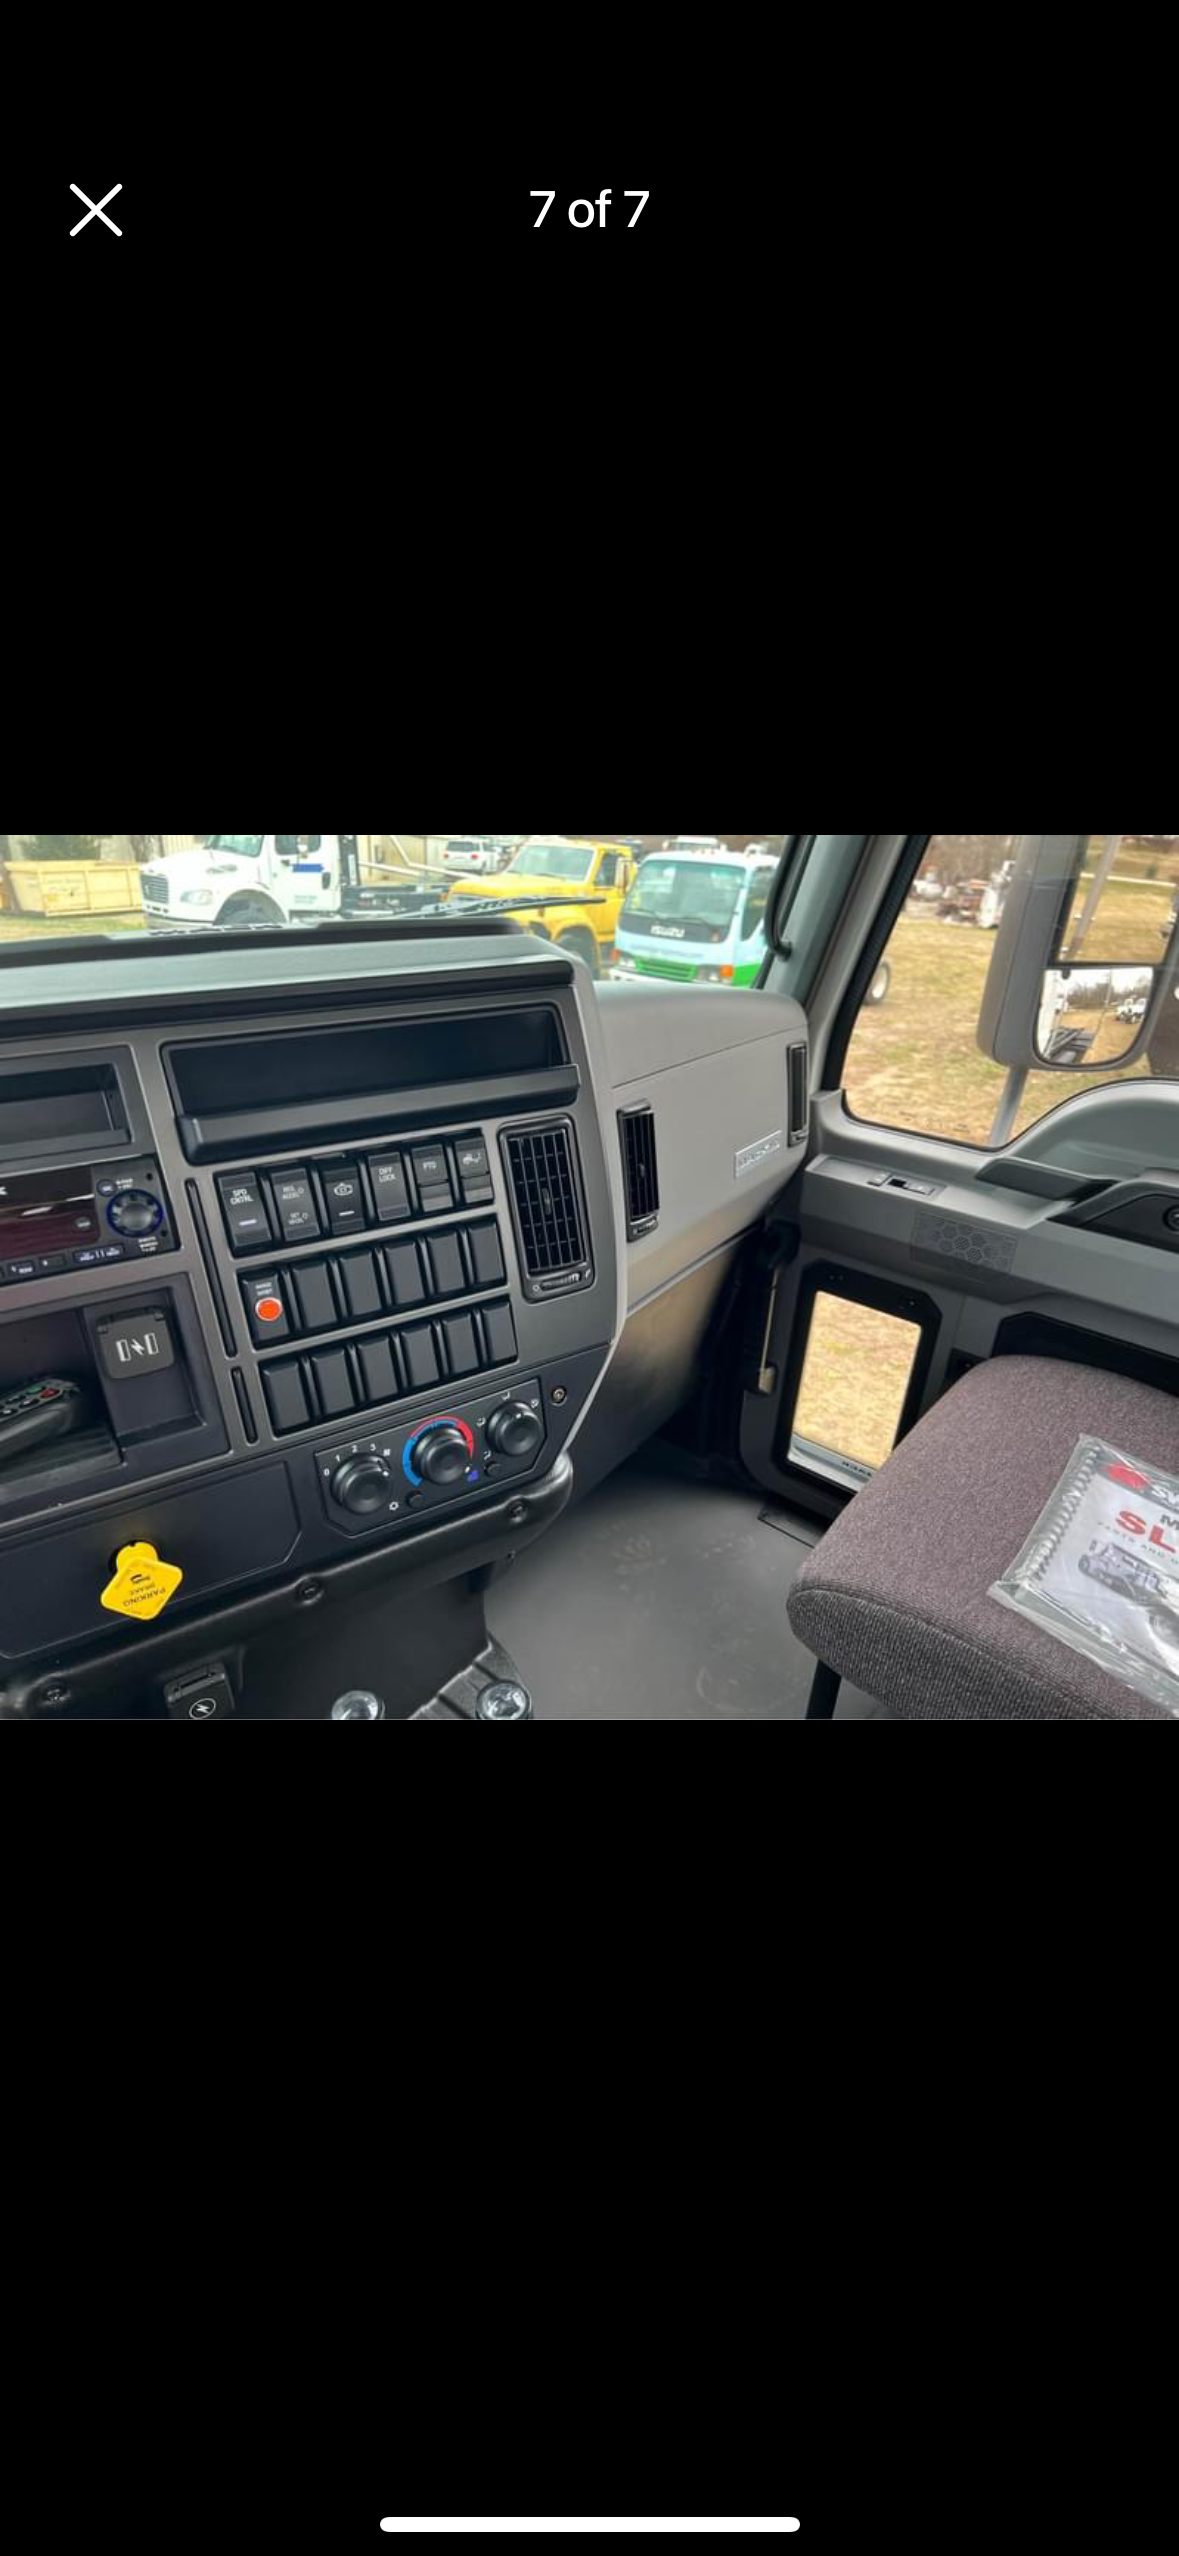 A close up of the dashboard of a bus.